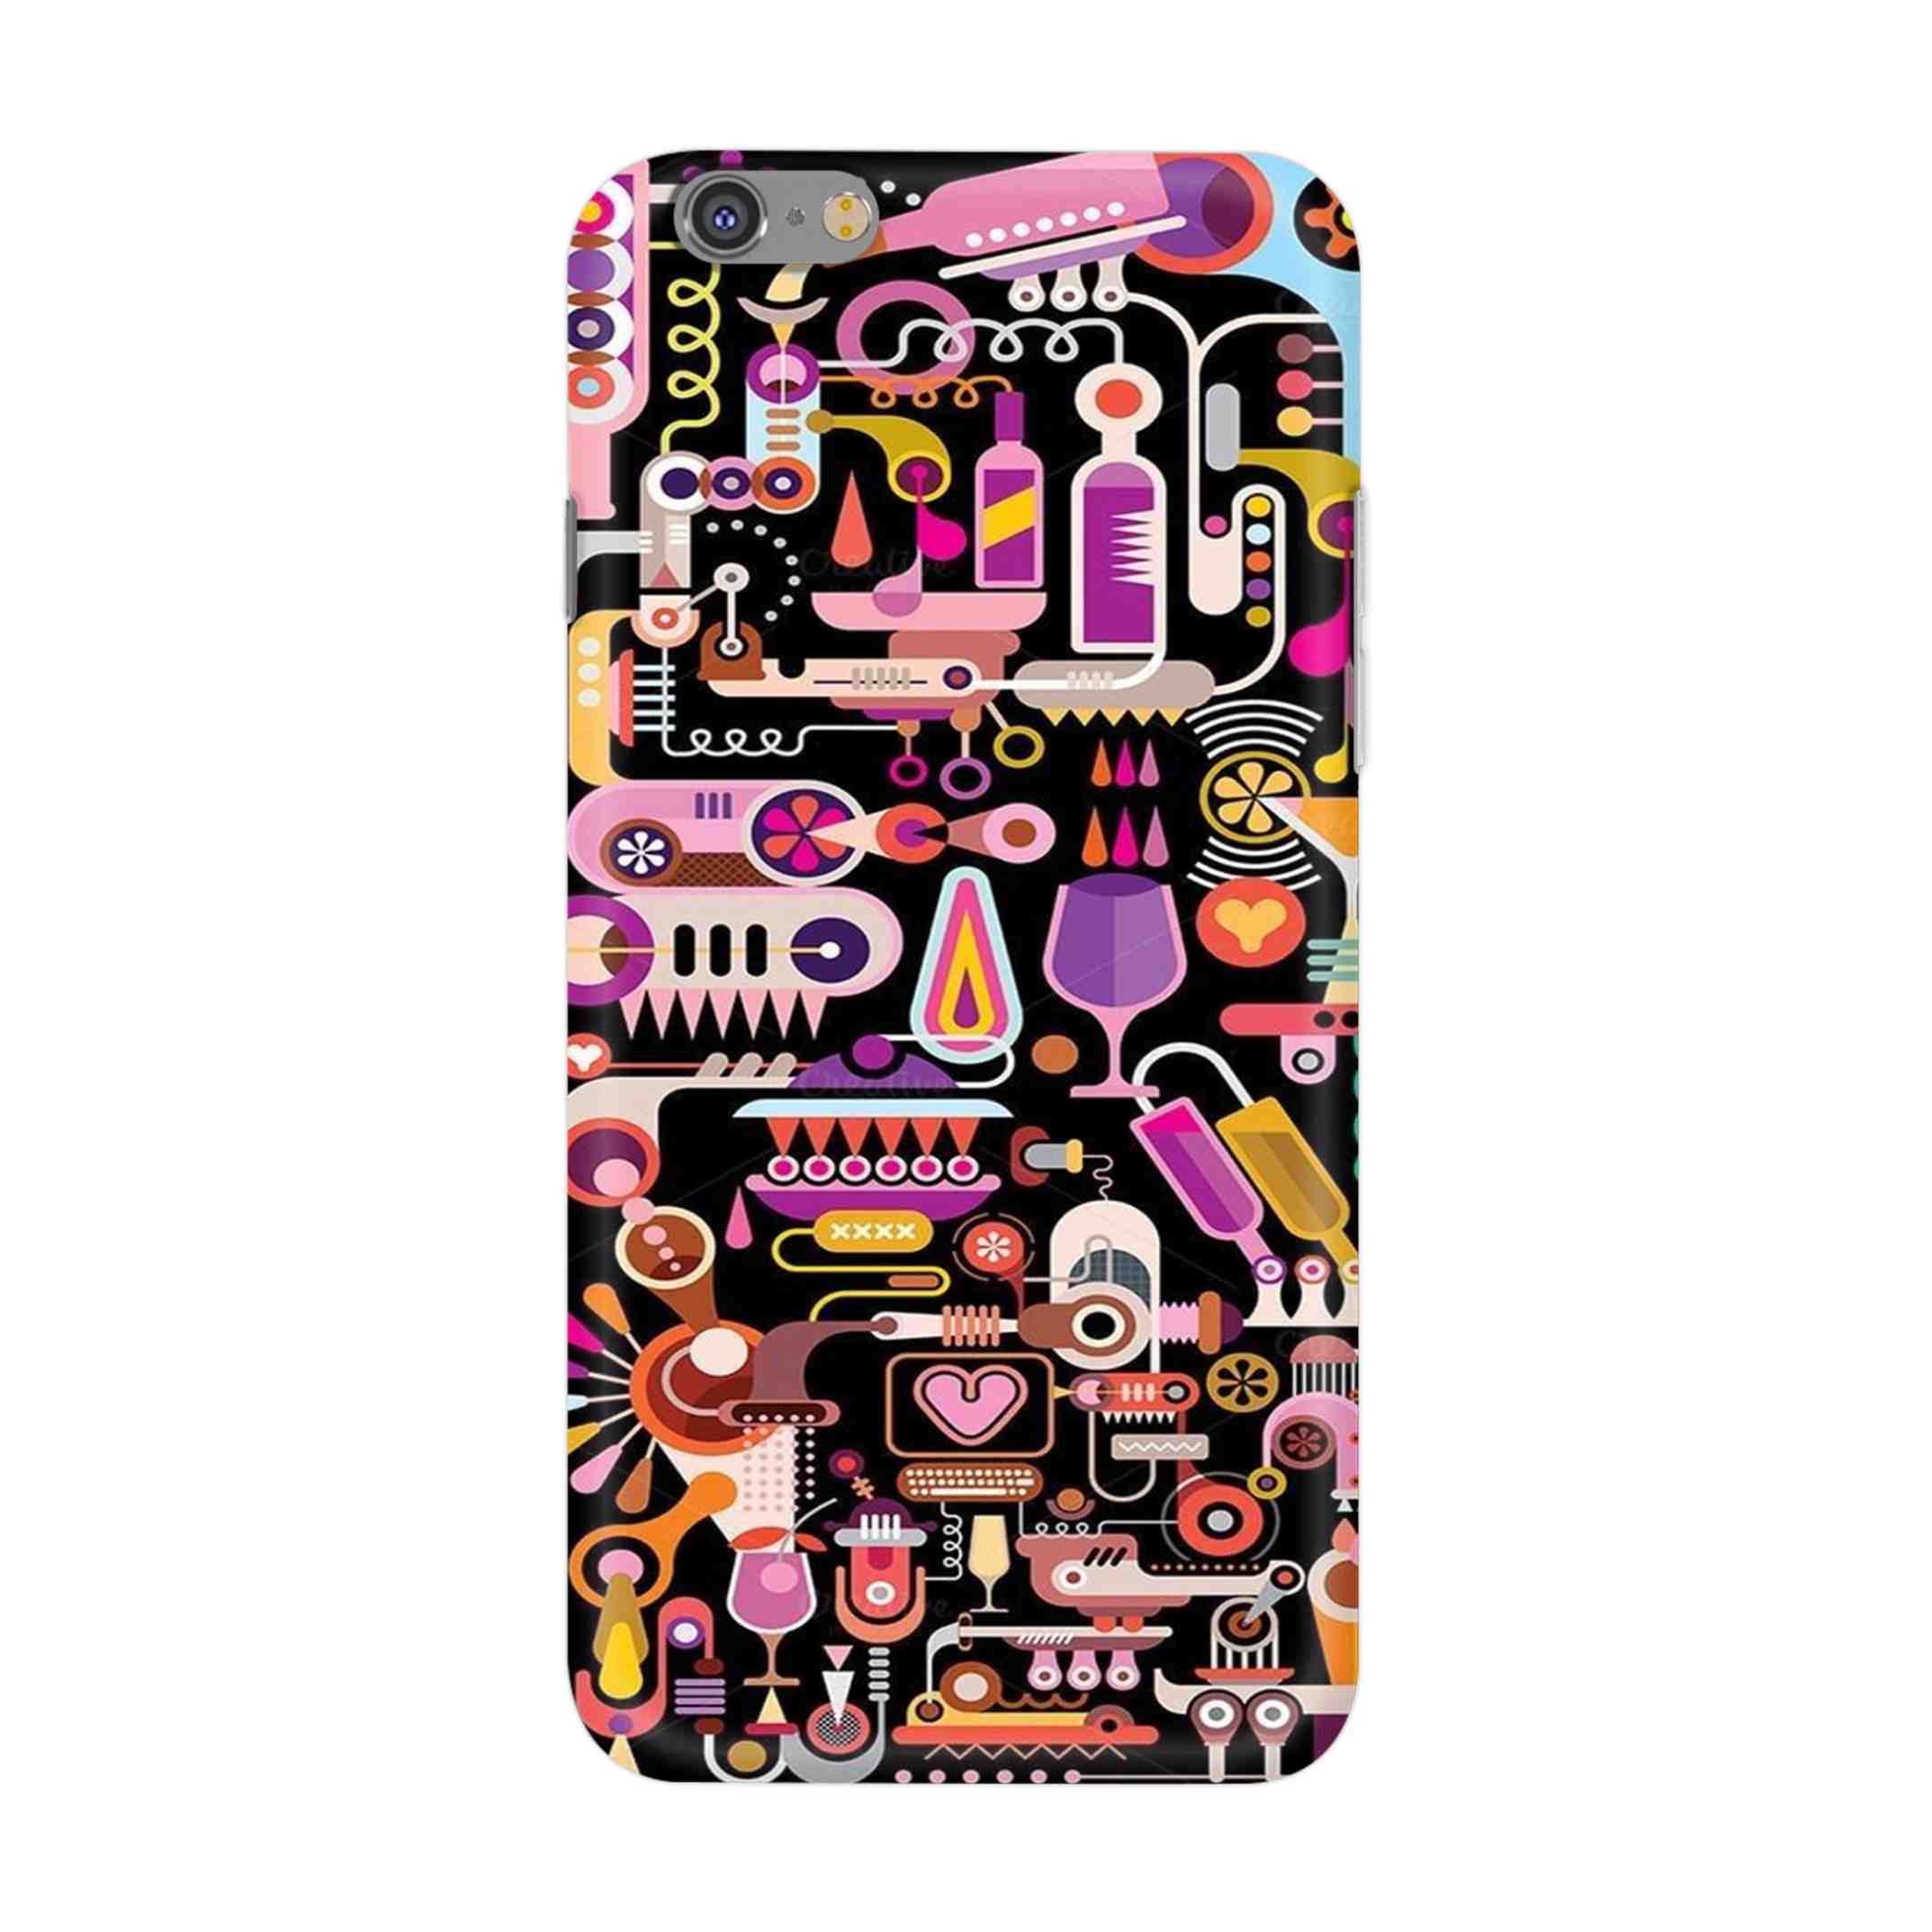 Buy Art Hard Back Mobile Phone Case/Cover For iPhone 6 / 6s Online